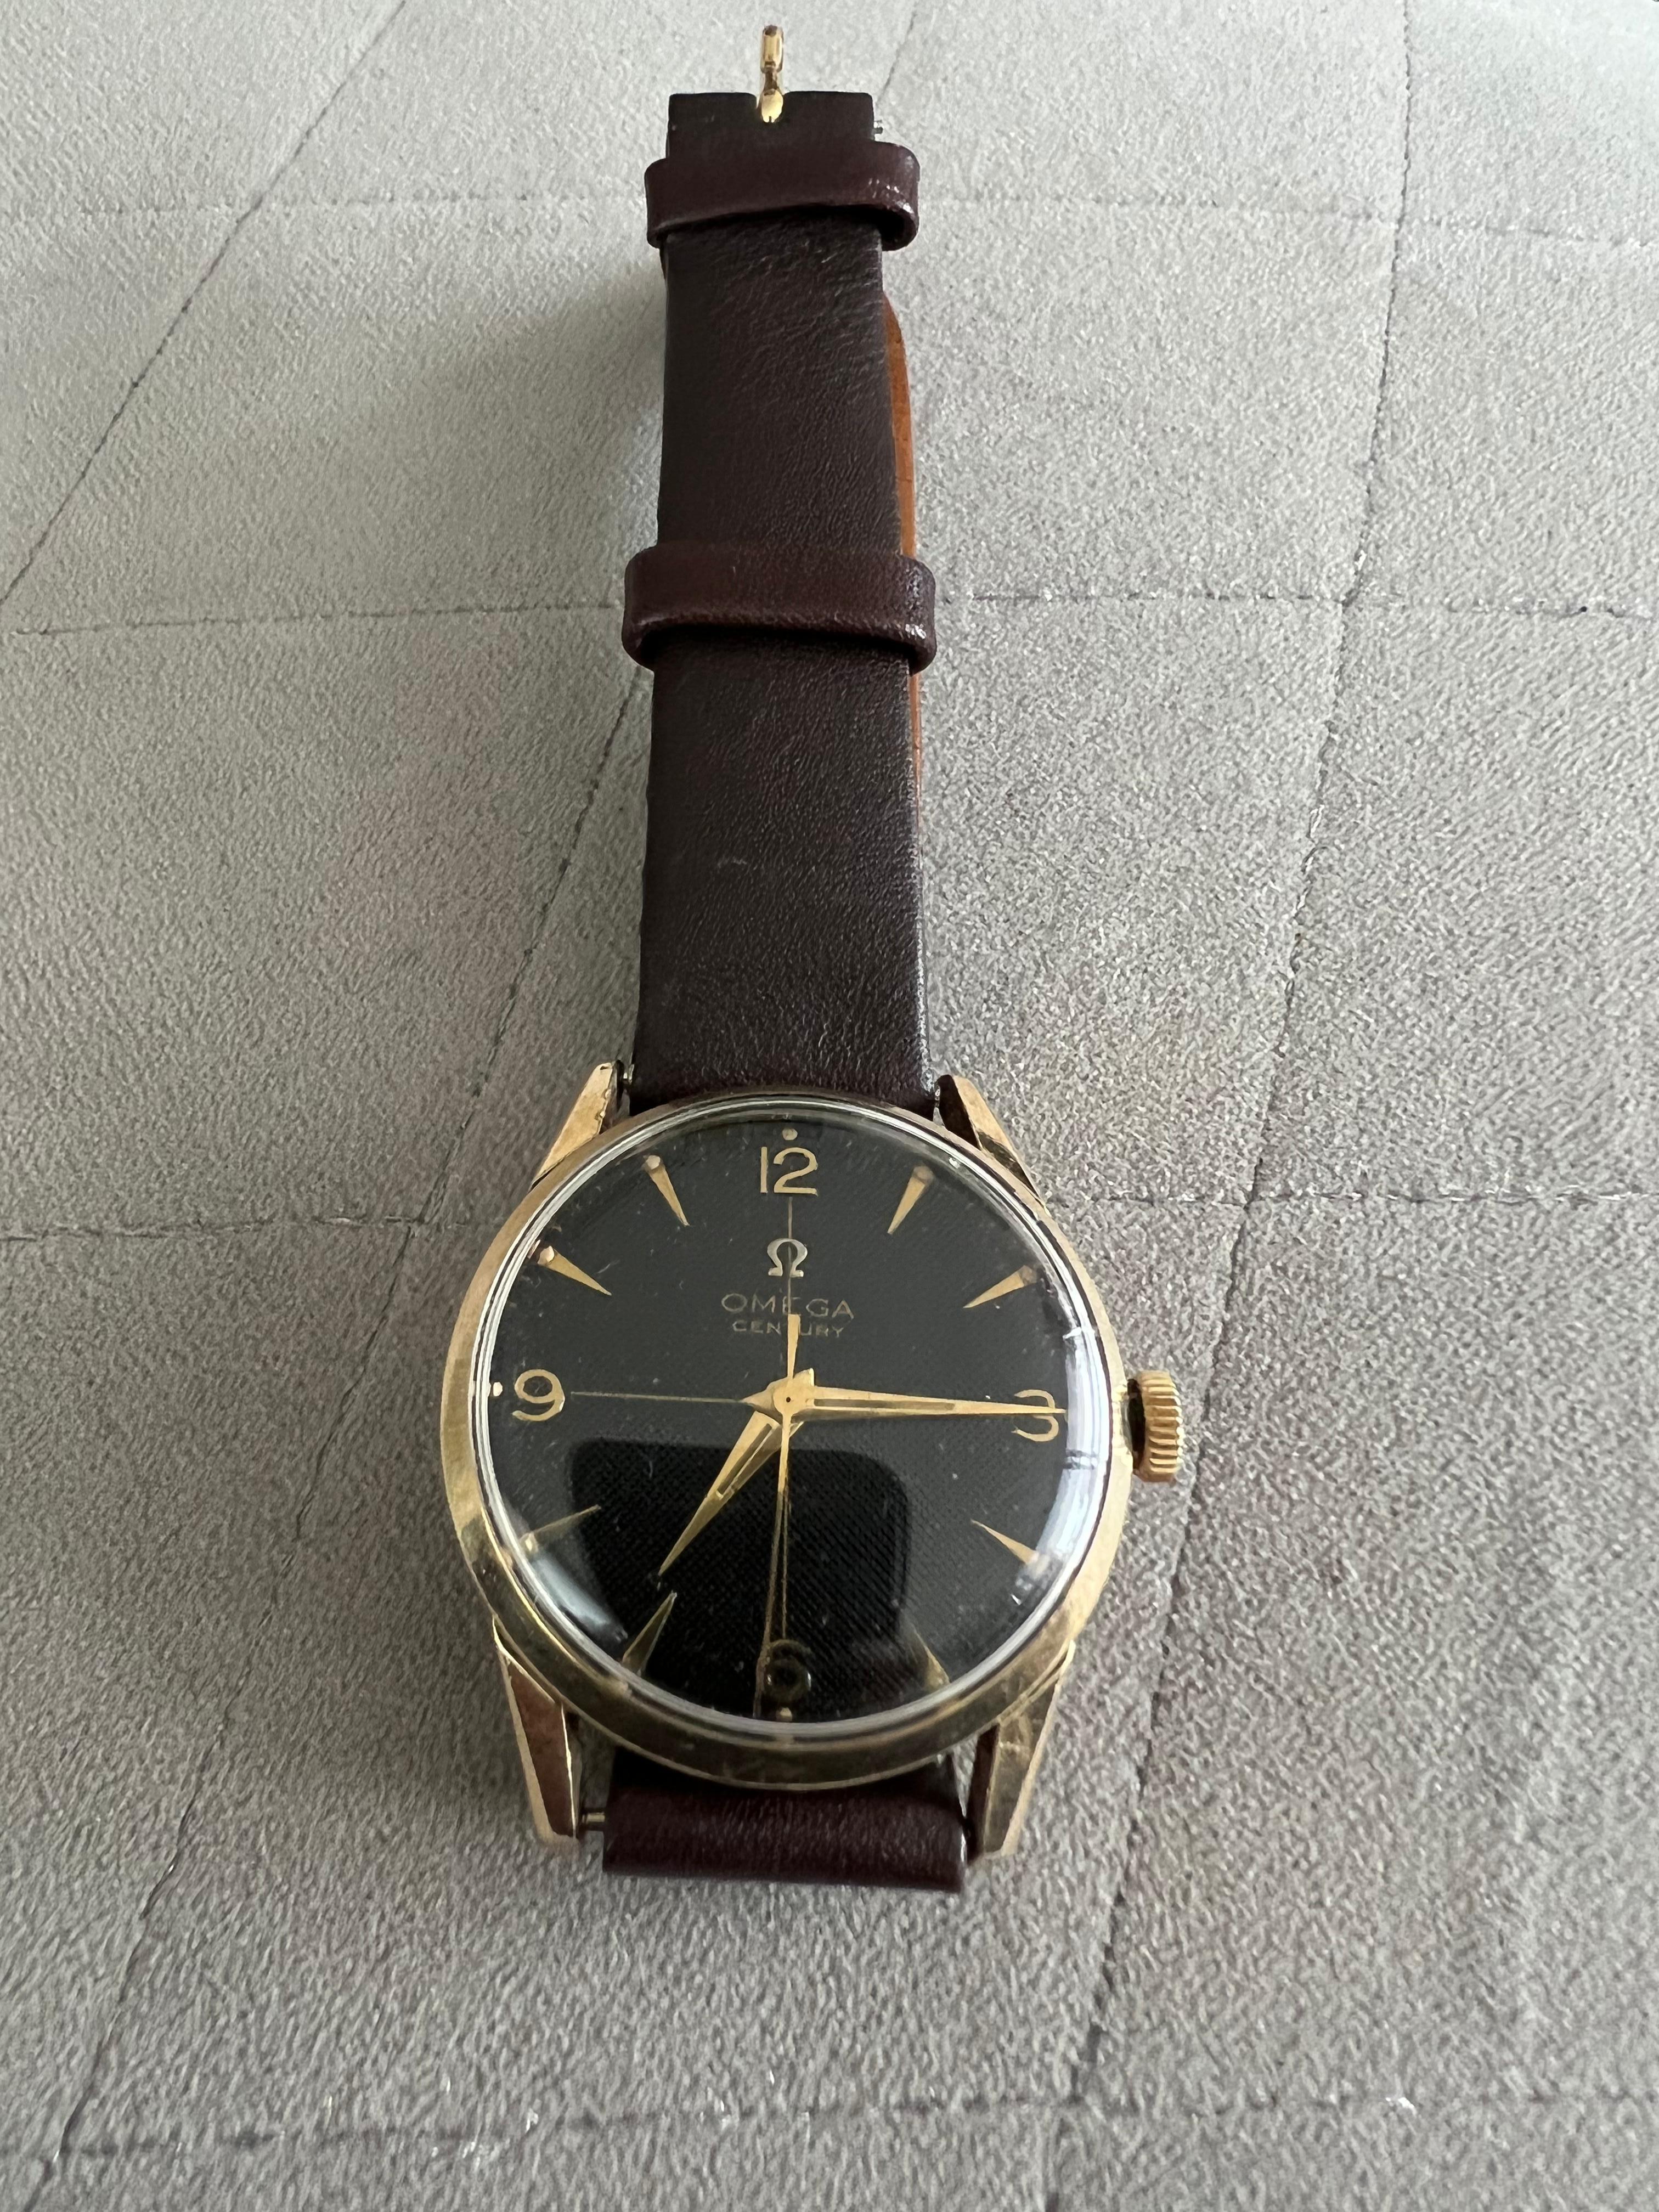 Omega century Gold Black Vintage 1962 Caliber 286 
10 K Yellow gold 
It has a inscription in the back …
Ronson long service award, Dec 1956
Original case, dials an crown 
Manual Winding Watch
The watch in an excellent condition.
Watch has the